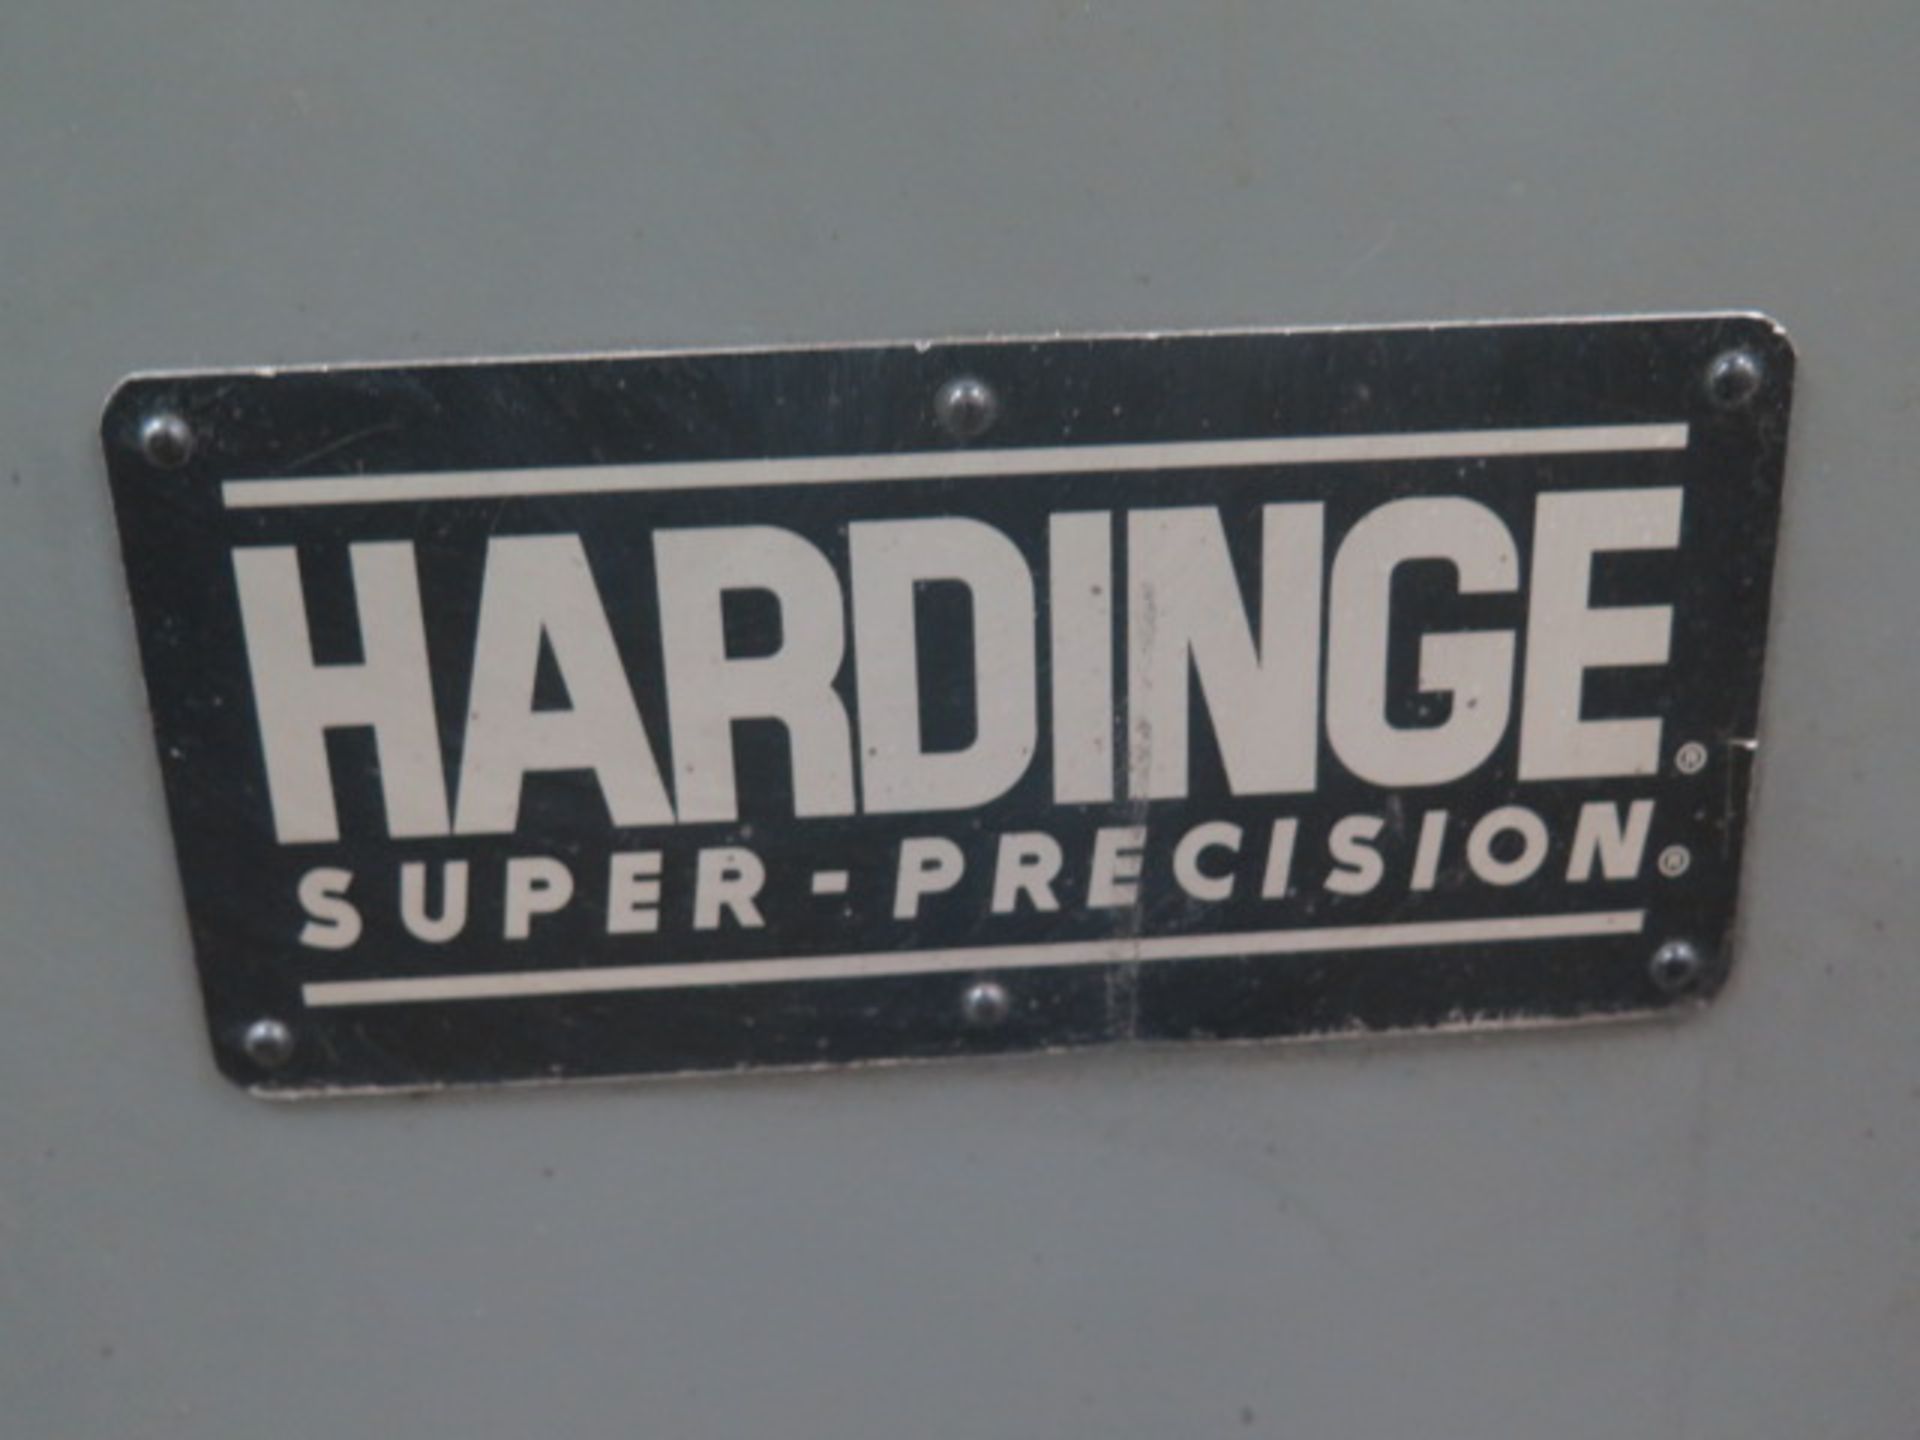 Hardinge TFB-H Wide-Bed Tool Room Lathe s/n HLV-H-9244-T w/ 125-3000 RPM, Tailstock, Power Feeds, - Image 8 of 8